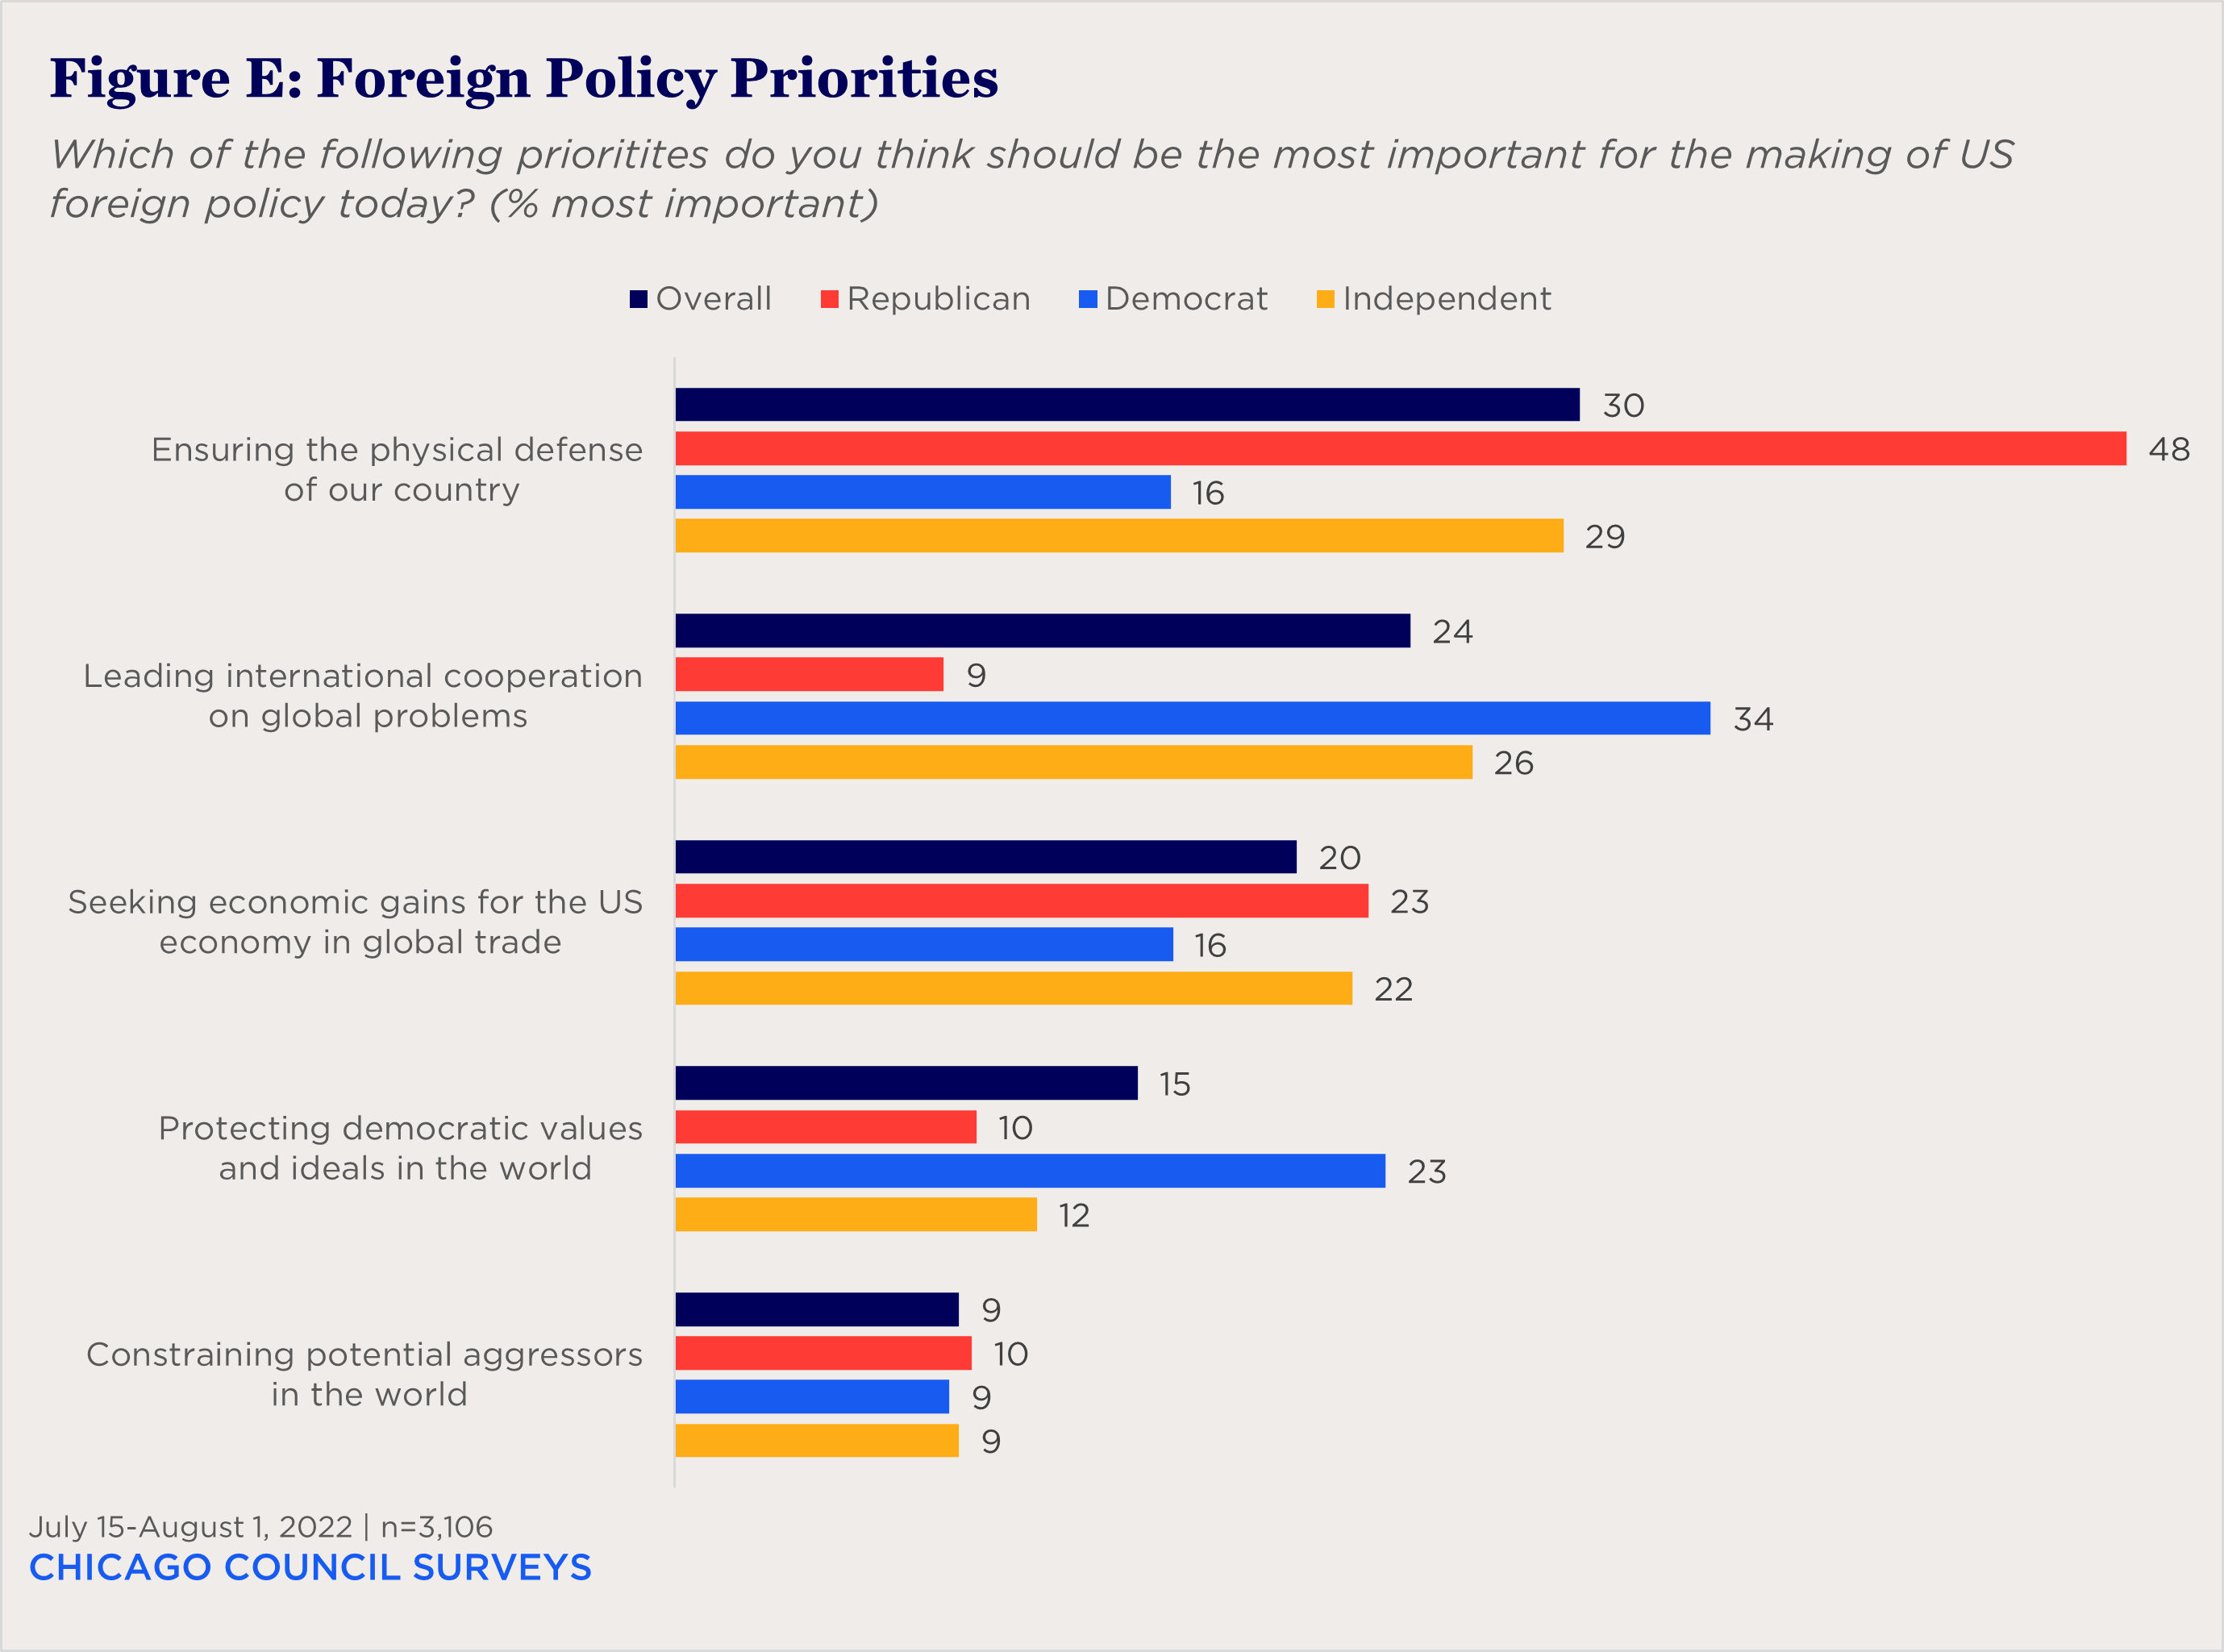 "bar chart showing partisan views of US foreign policy priorities"